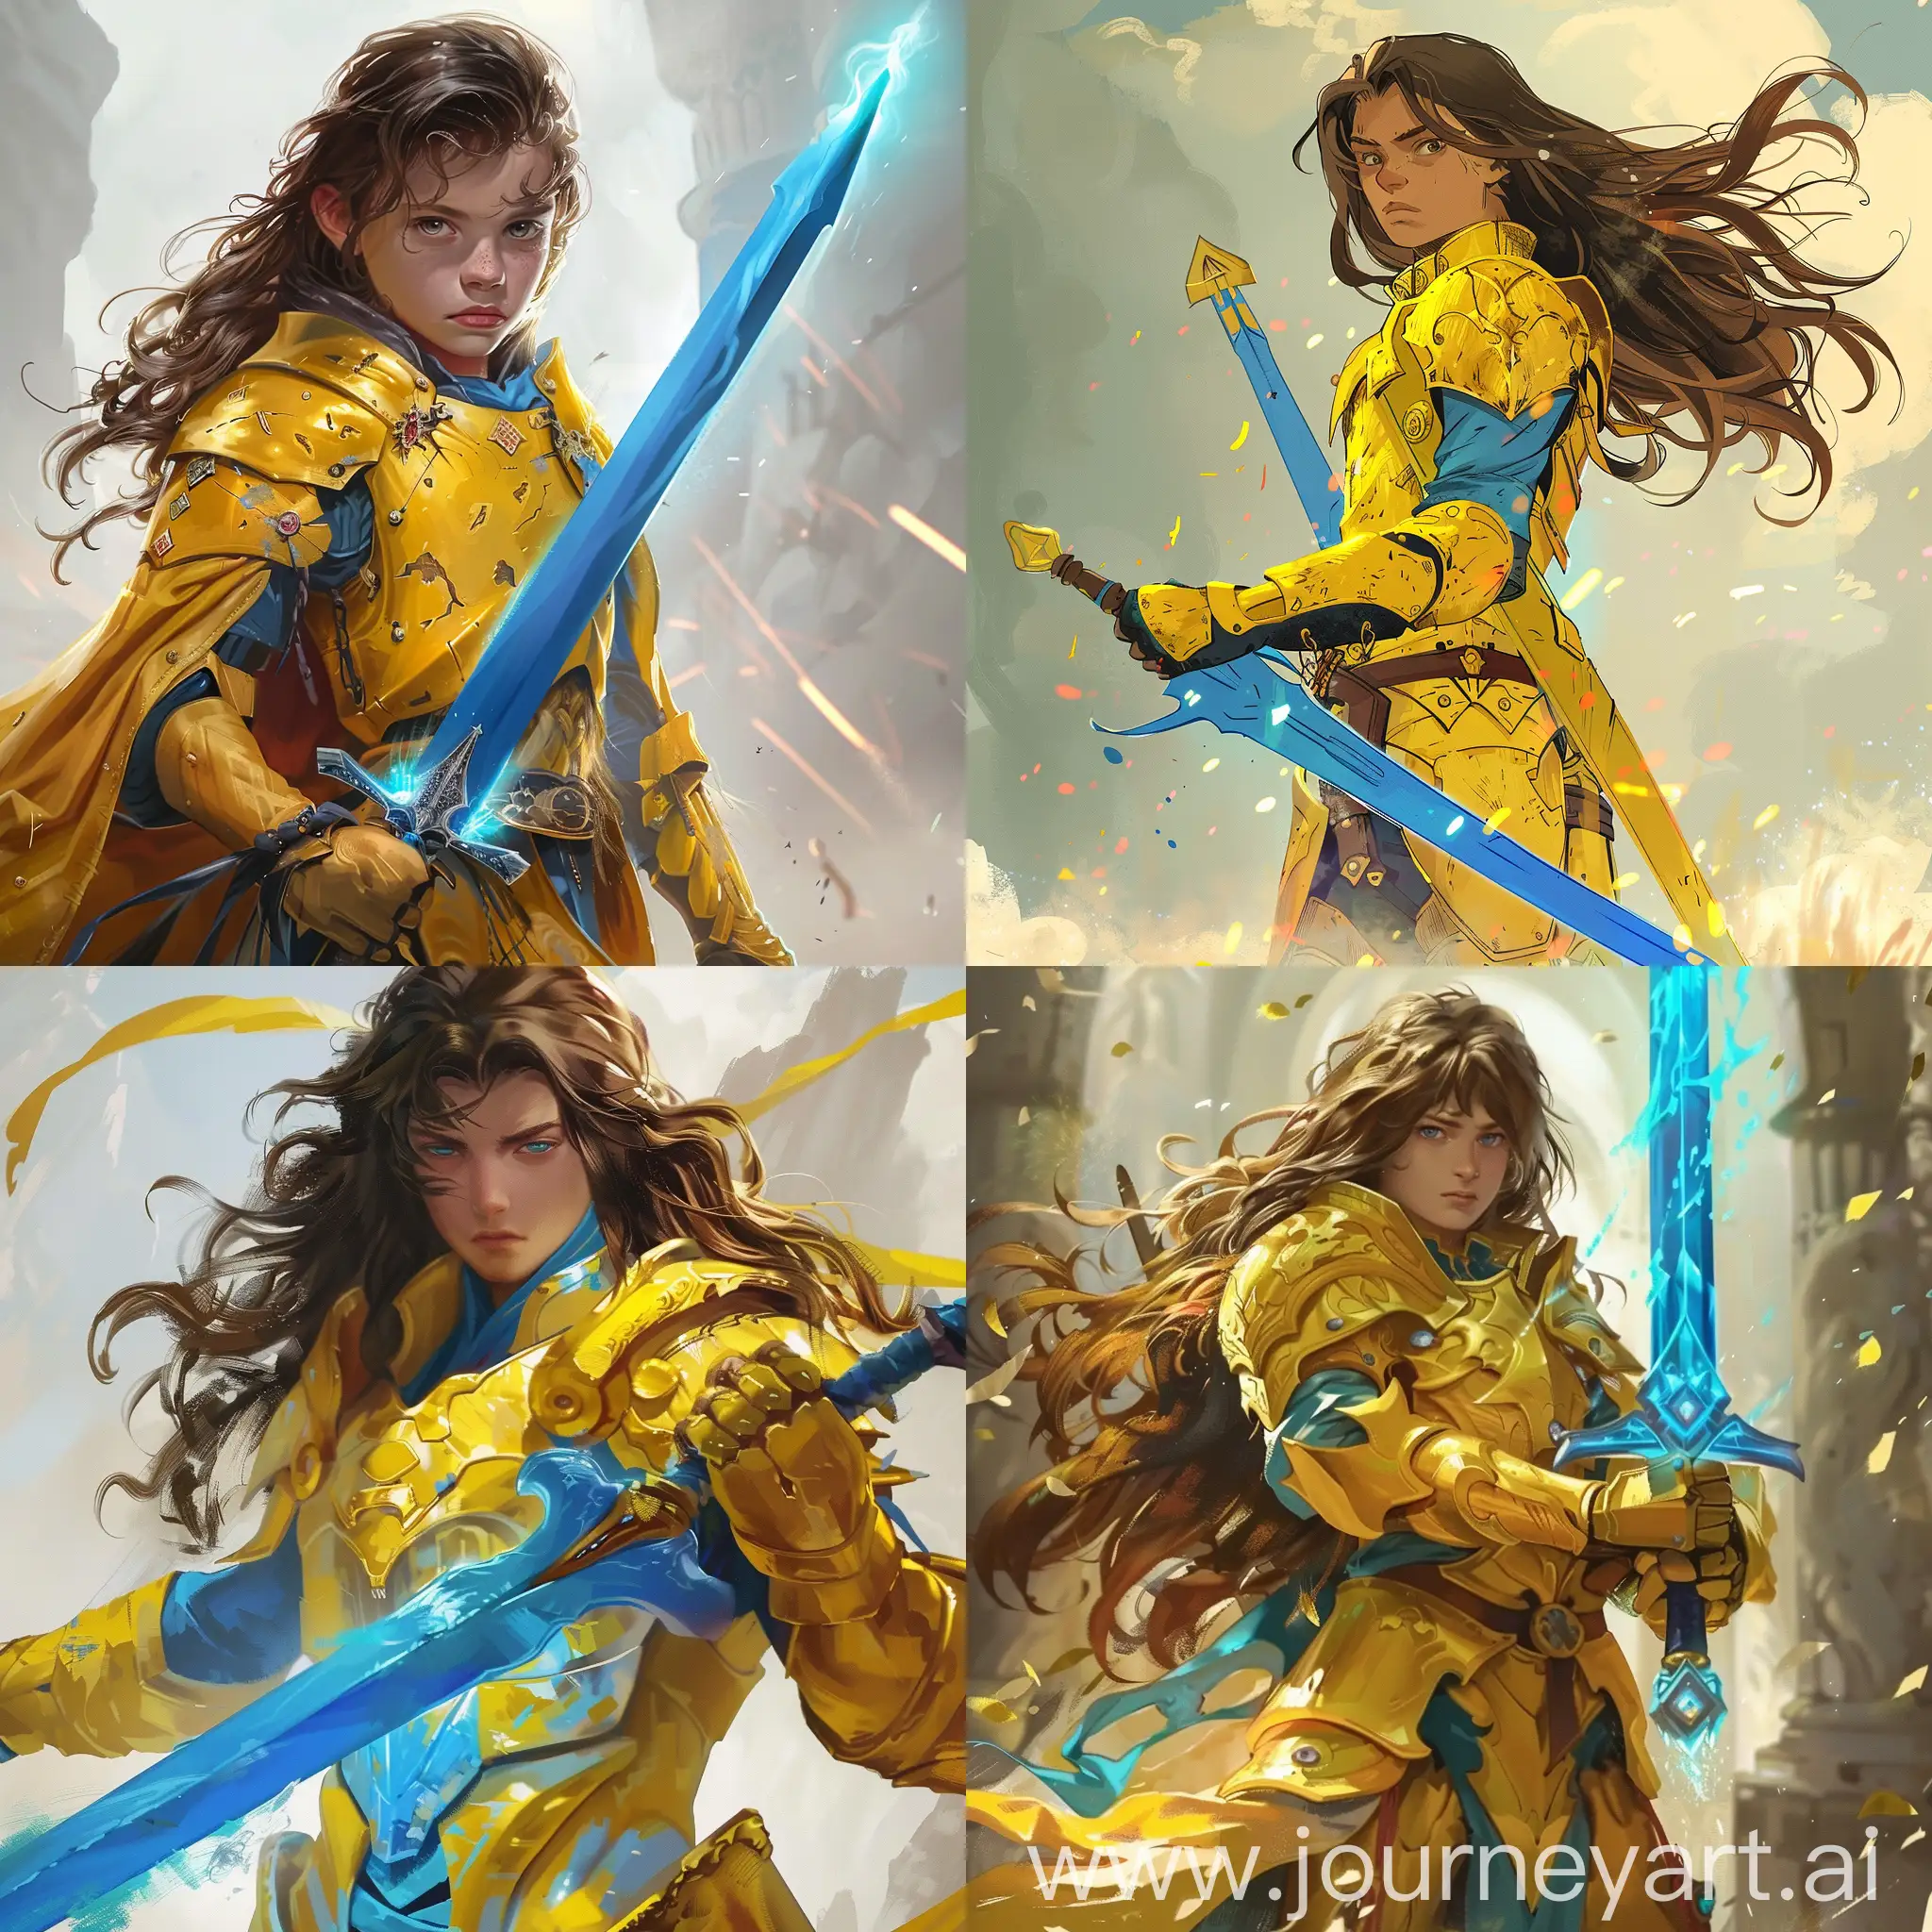 Young-Warrior-with-Blue-Sword-and-Yellow-Armor